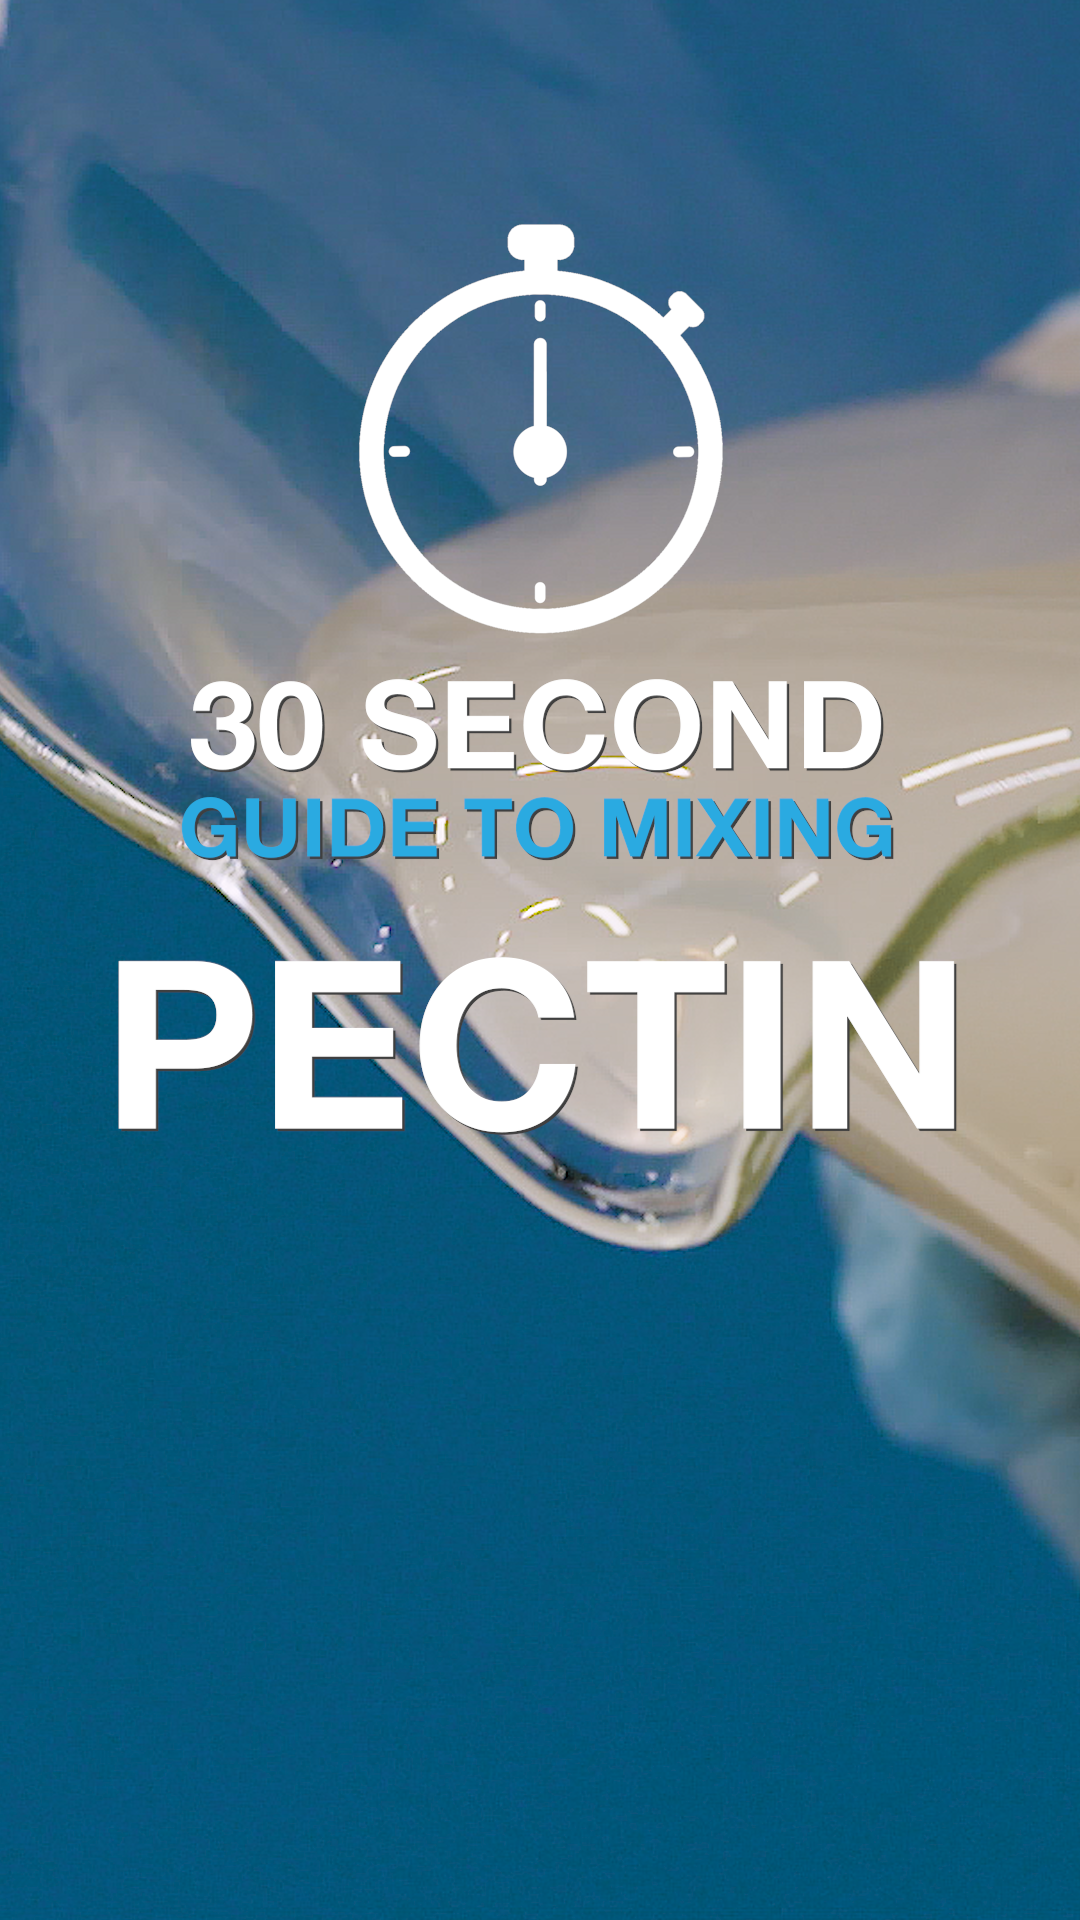 30 Second Guide to Mixing Pectin